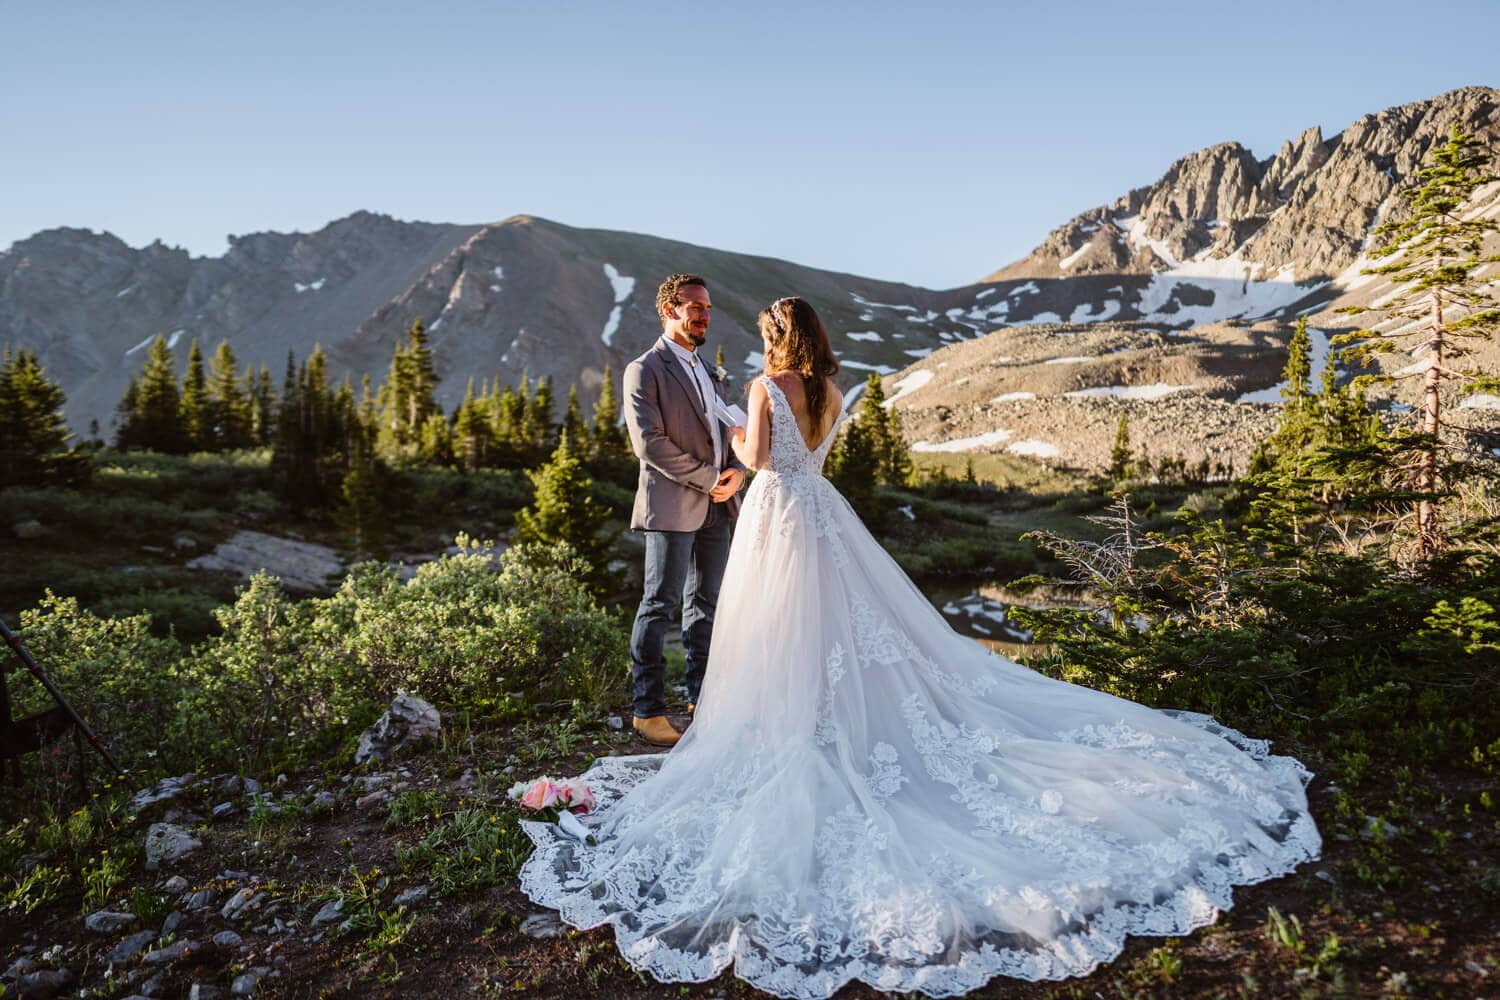 Vows What You Should Pack for Your Elopement